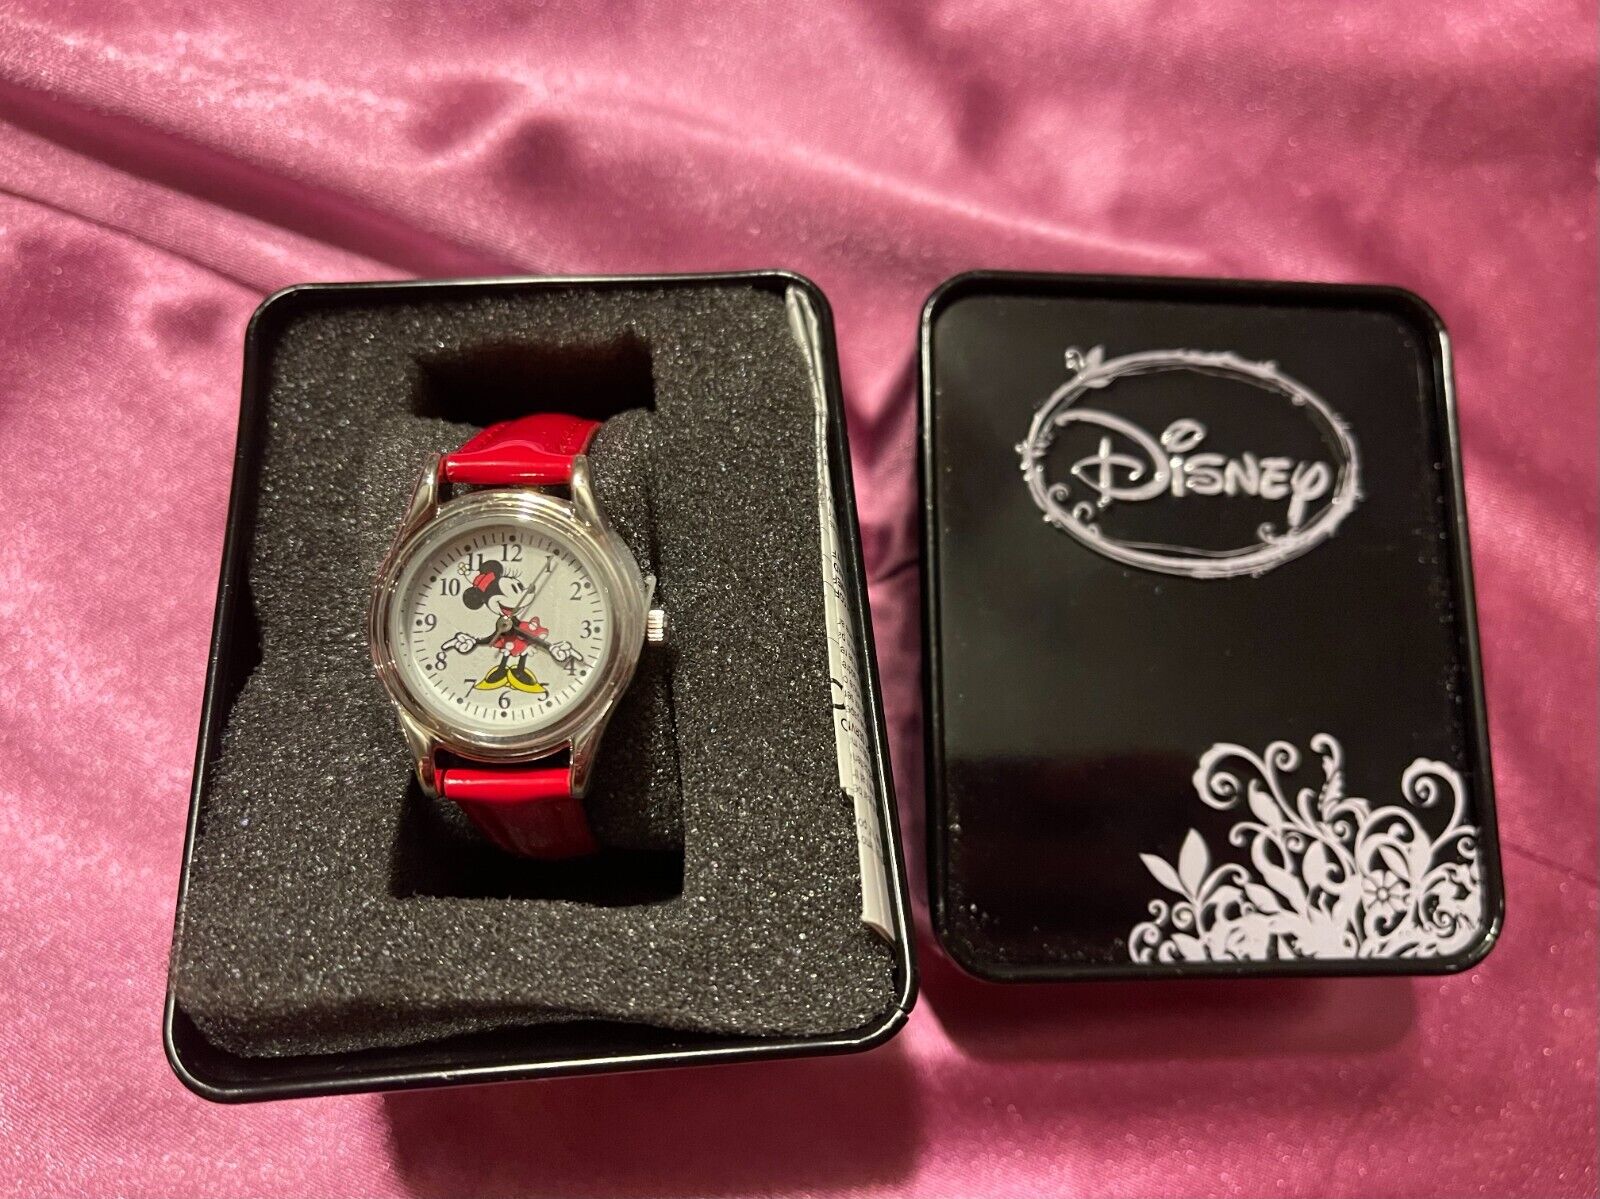 Disney Ladies Minnie Mouse Accutime Watch Corp Stainless Steel. New in box